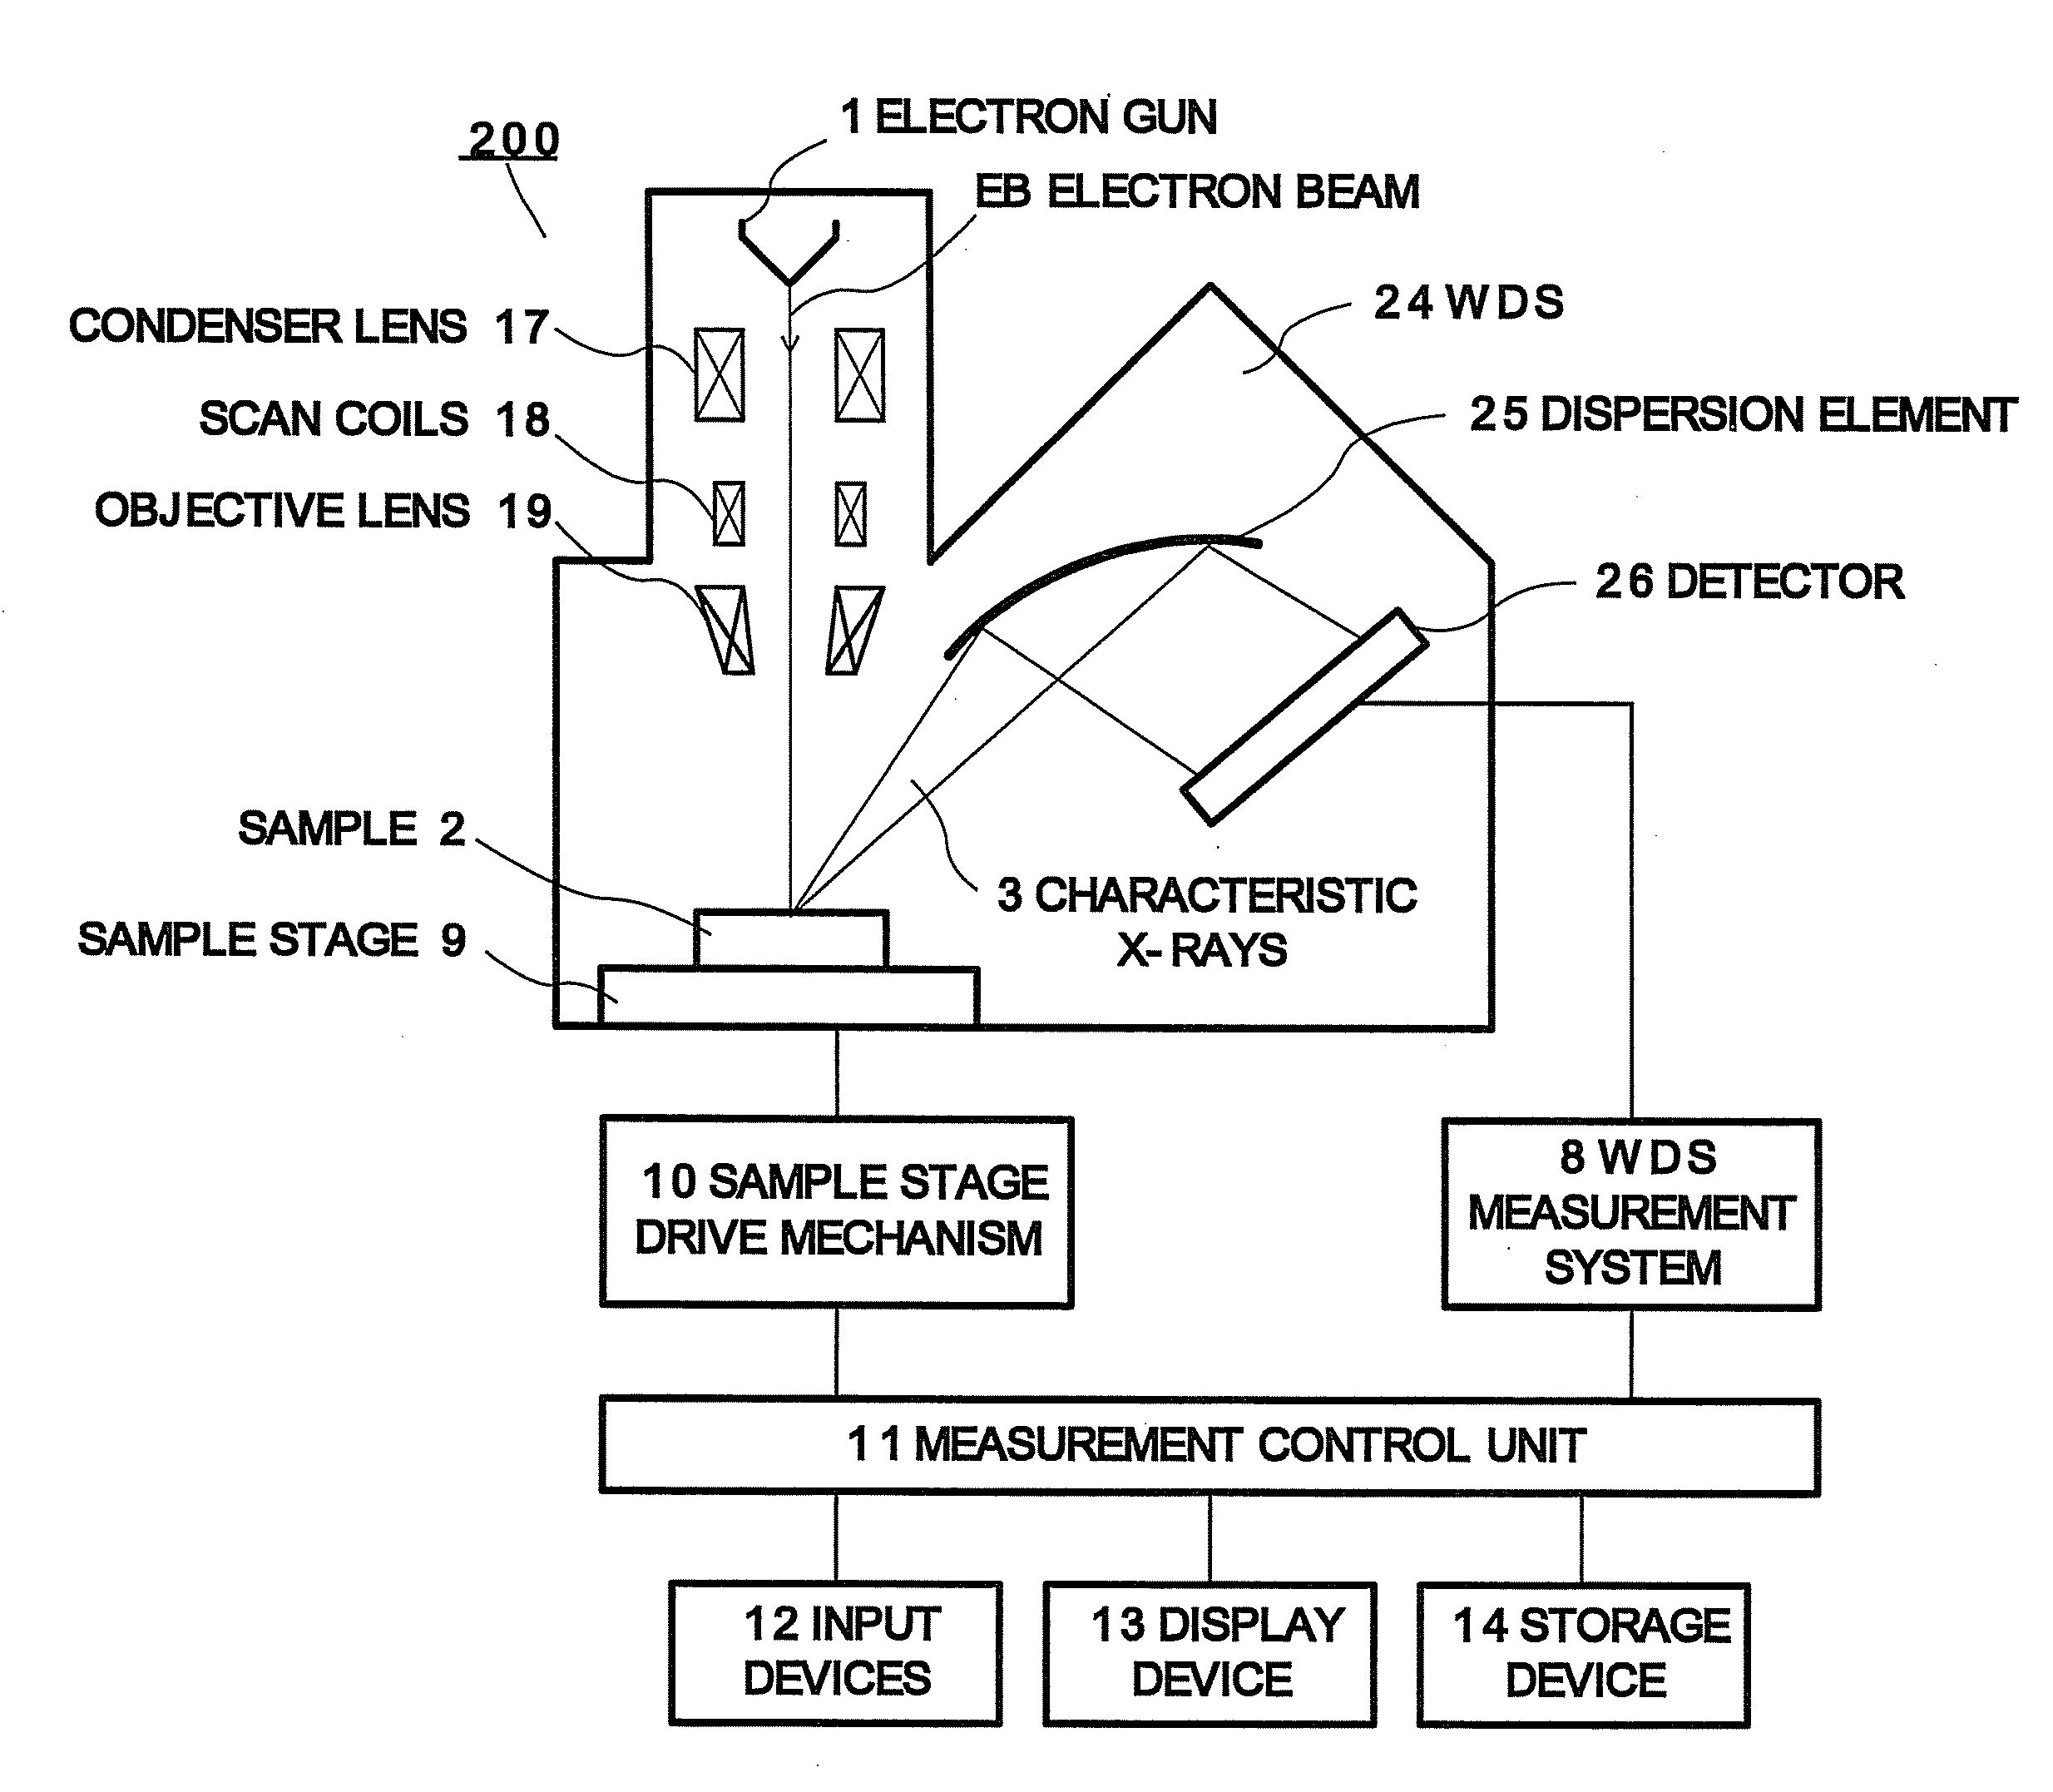 Apparatus and Method for X-Ray Analysis of Chemical State